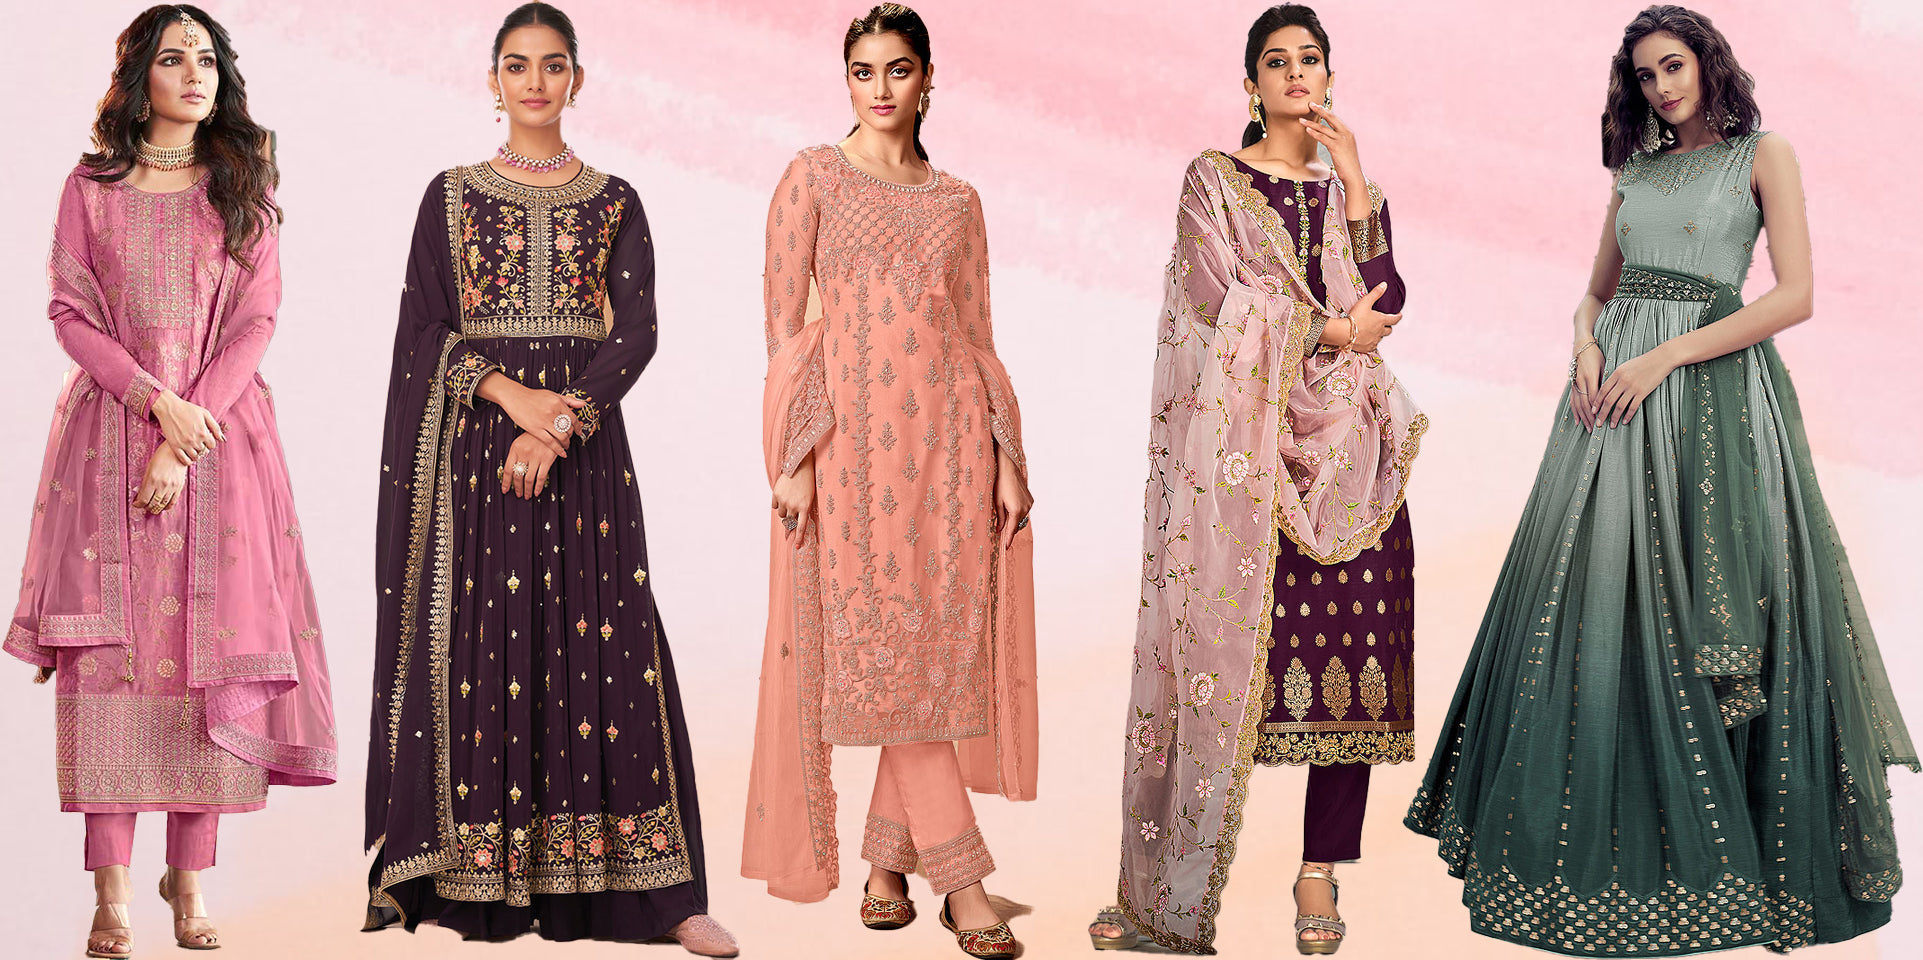 How to Look Stylish in Traditional Indian Clothing? Where to Buy the Best Fashionable Ethnic Wear for Women Online?